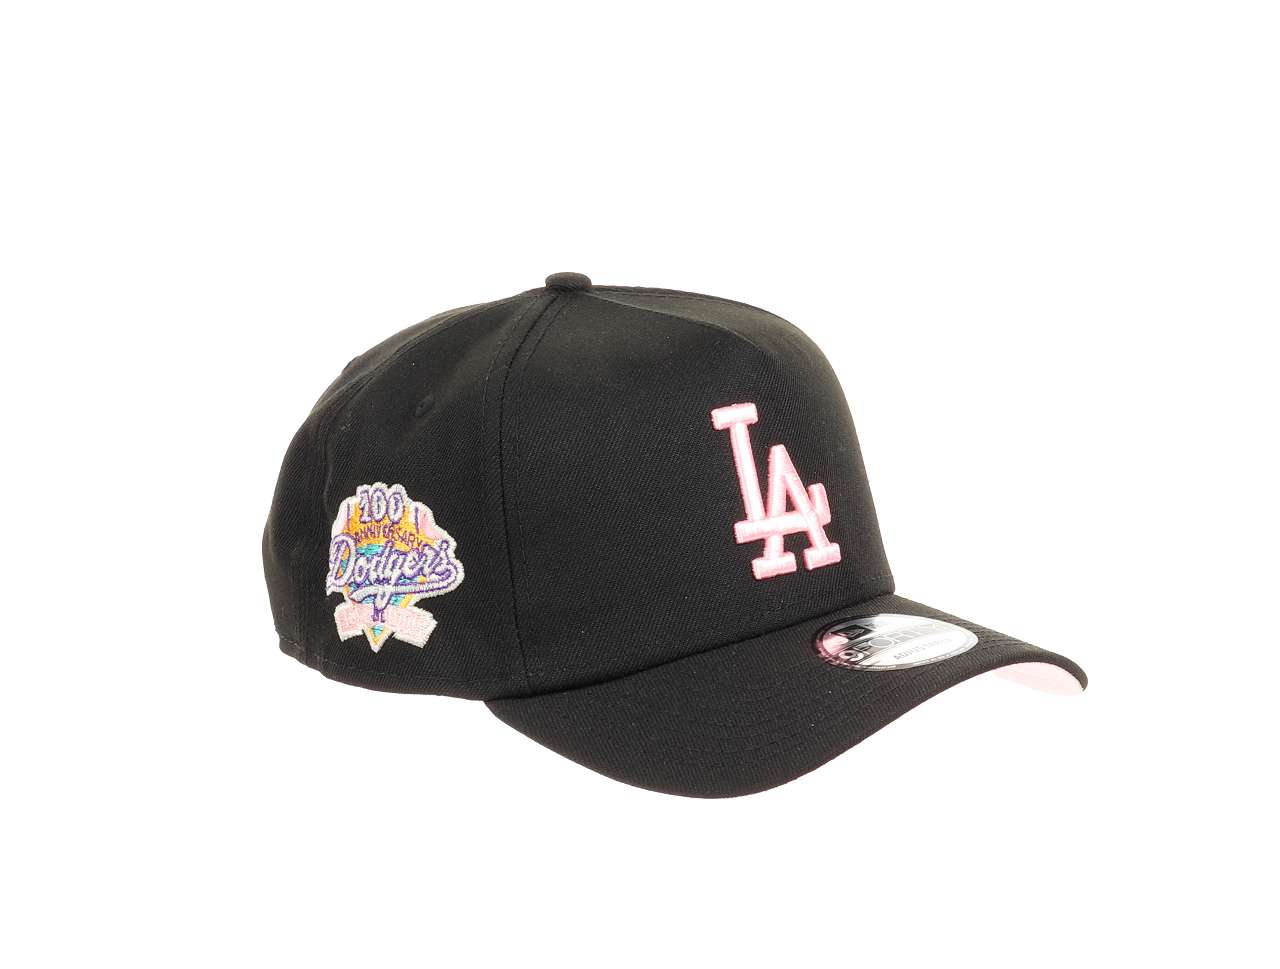 Los Angeles Dodgers MLB 100th Anniversary Sidepatch Black 9Forty A-Frame Snapback Cap New Era